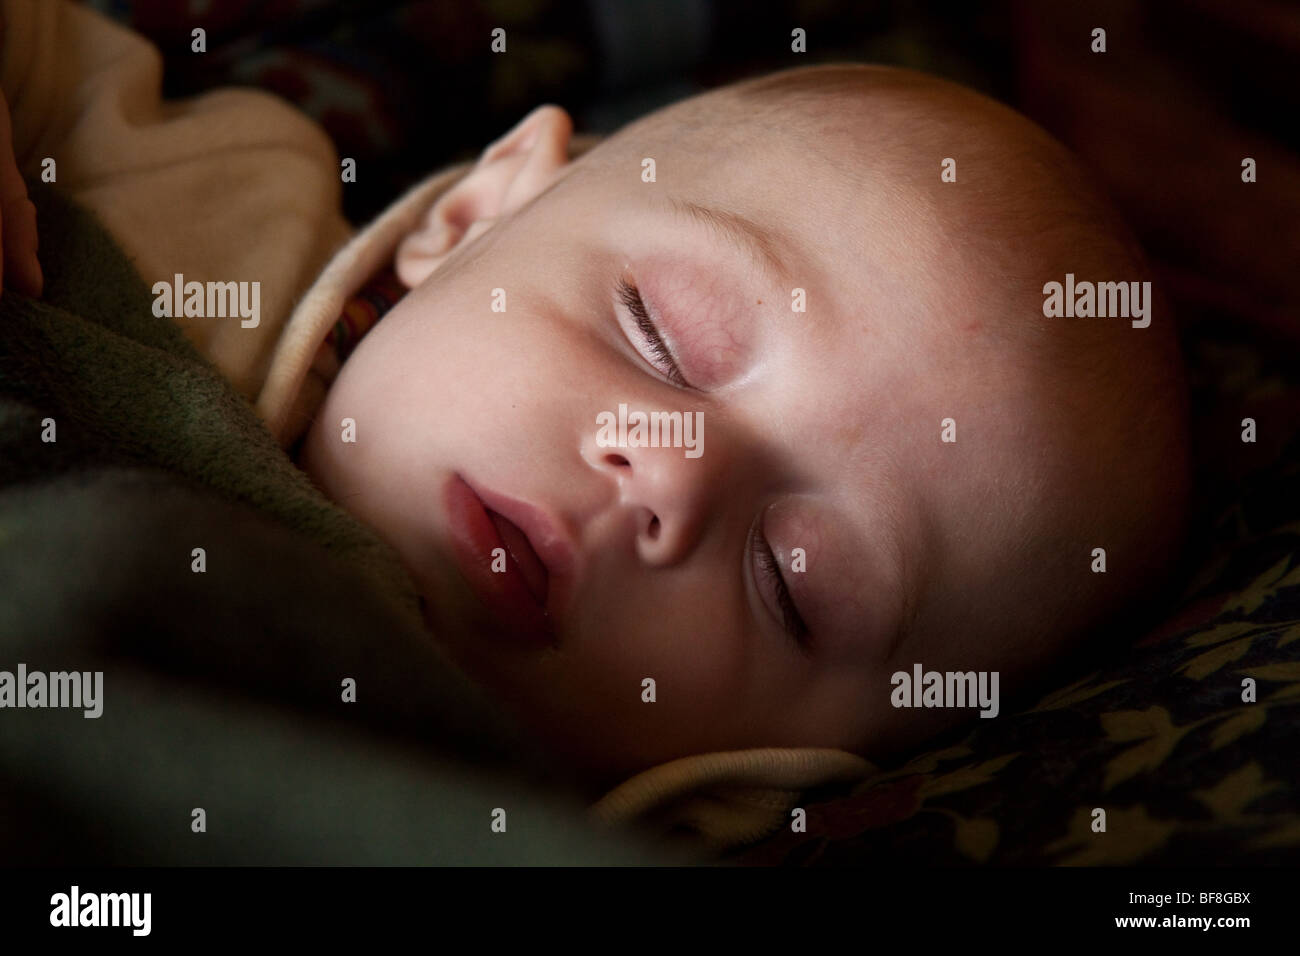 6 month old baby boy sleeping in dappled natural light, Hampshire England. Stock Photo